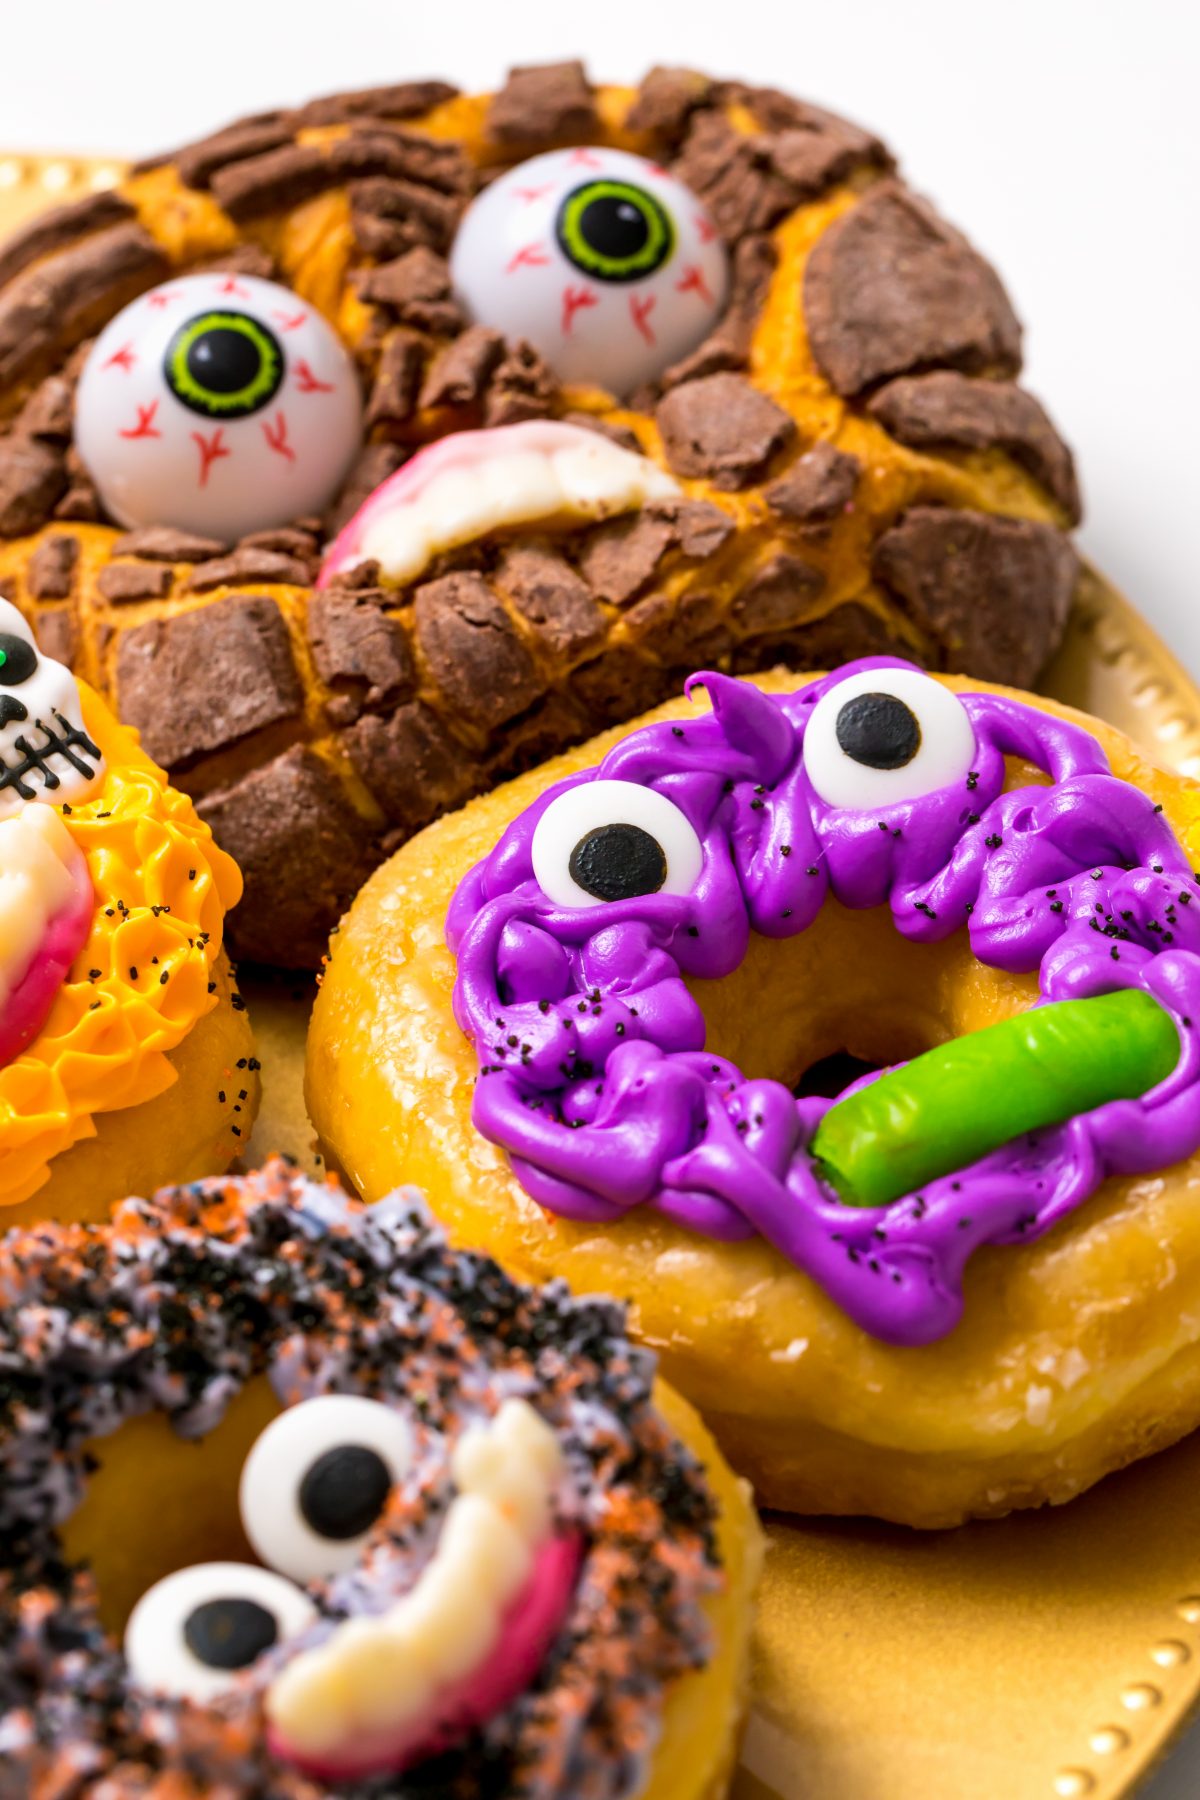 5D4B6543 - Crafty Chica - Monster Donuts